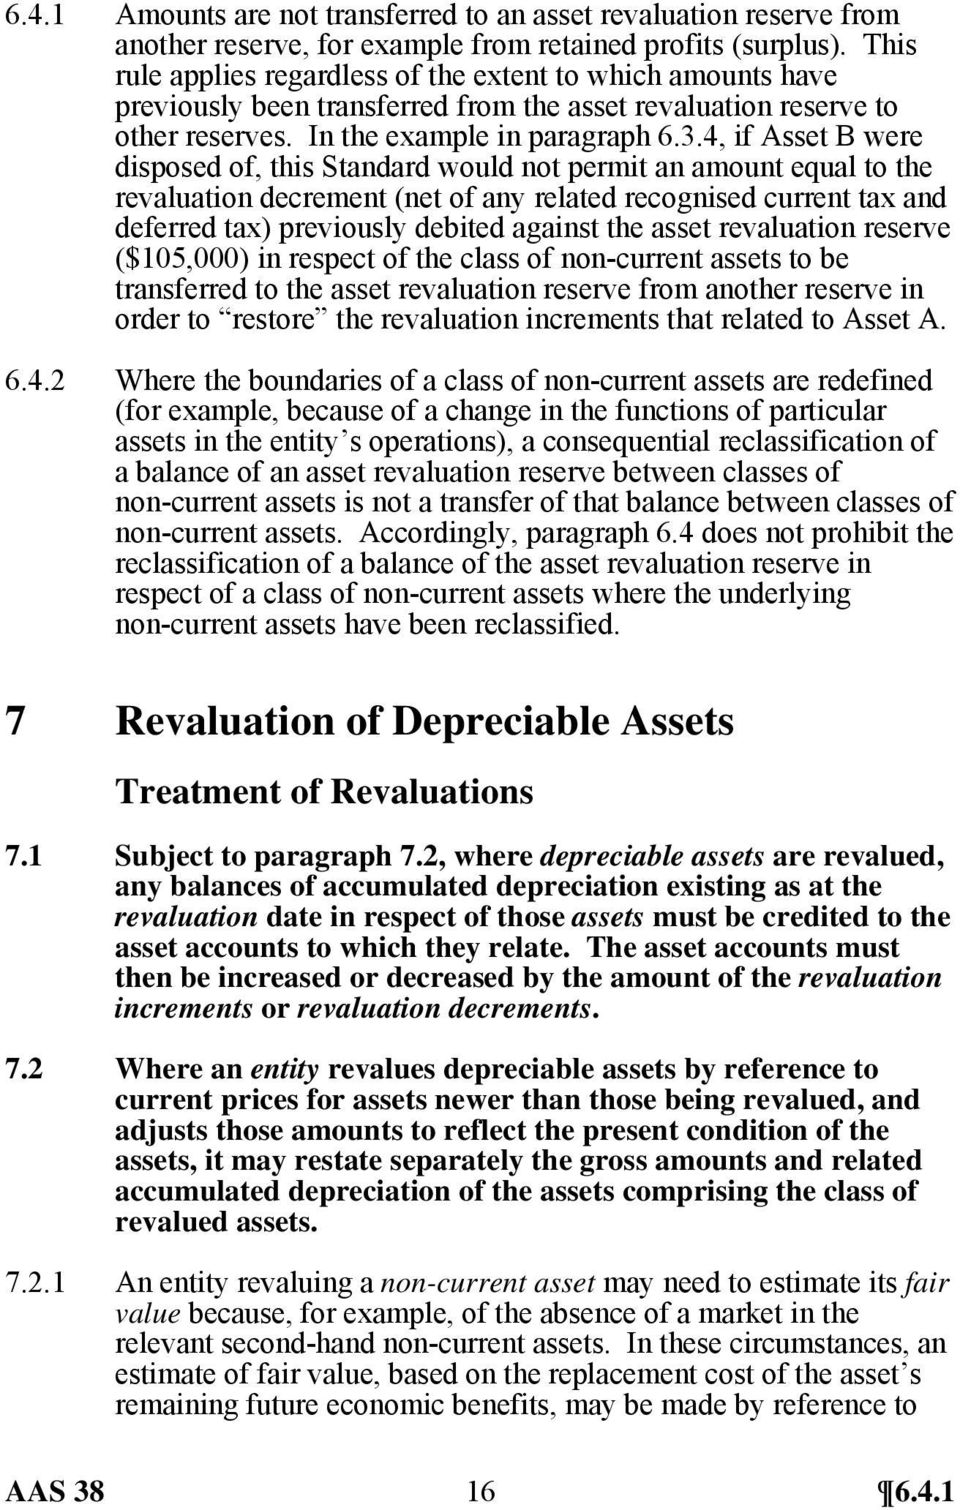 4, if Asset B were disposed of, this Standard would not permit an amount equal to the revaluation decrement (net of any related recognised current tax and deferred tax) previously debited against the